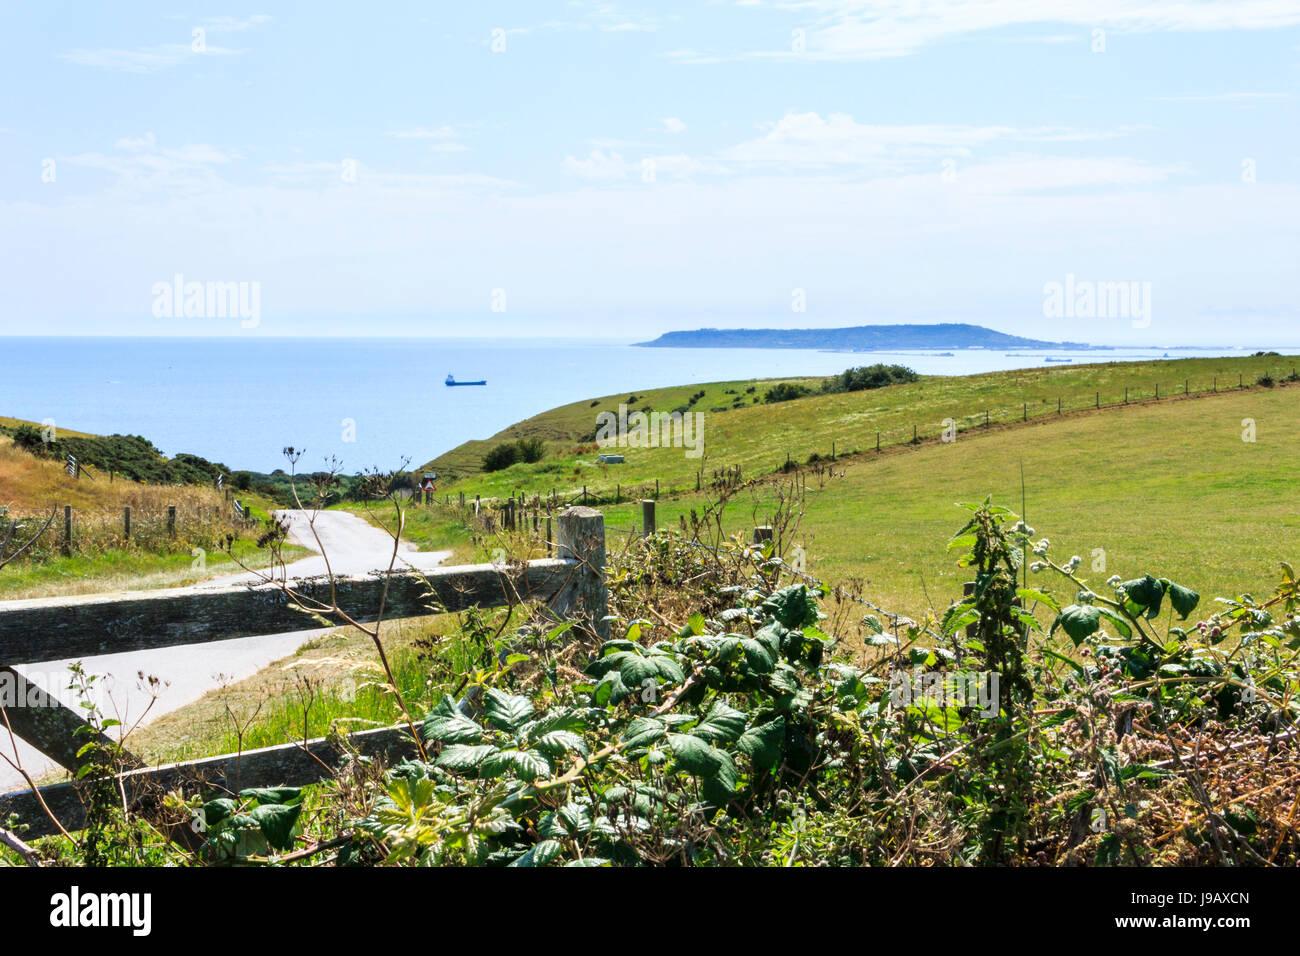 View over a five bar gate and fields, a winding road leading to the sea and Ringstead Bay, Dorset, England, UK, Portland Bill in the distance Stock Photo